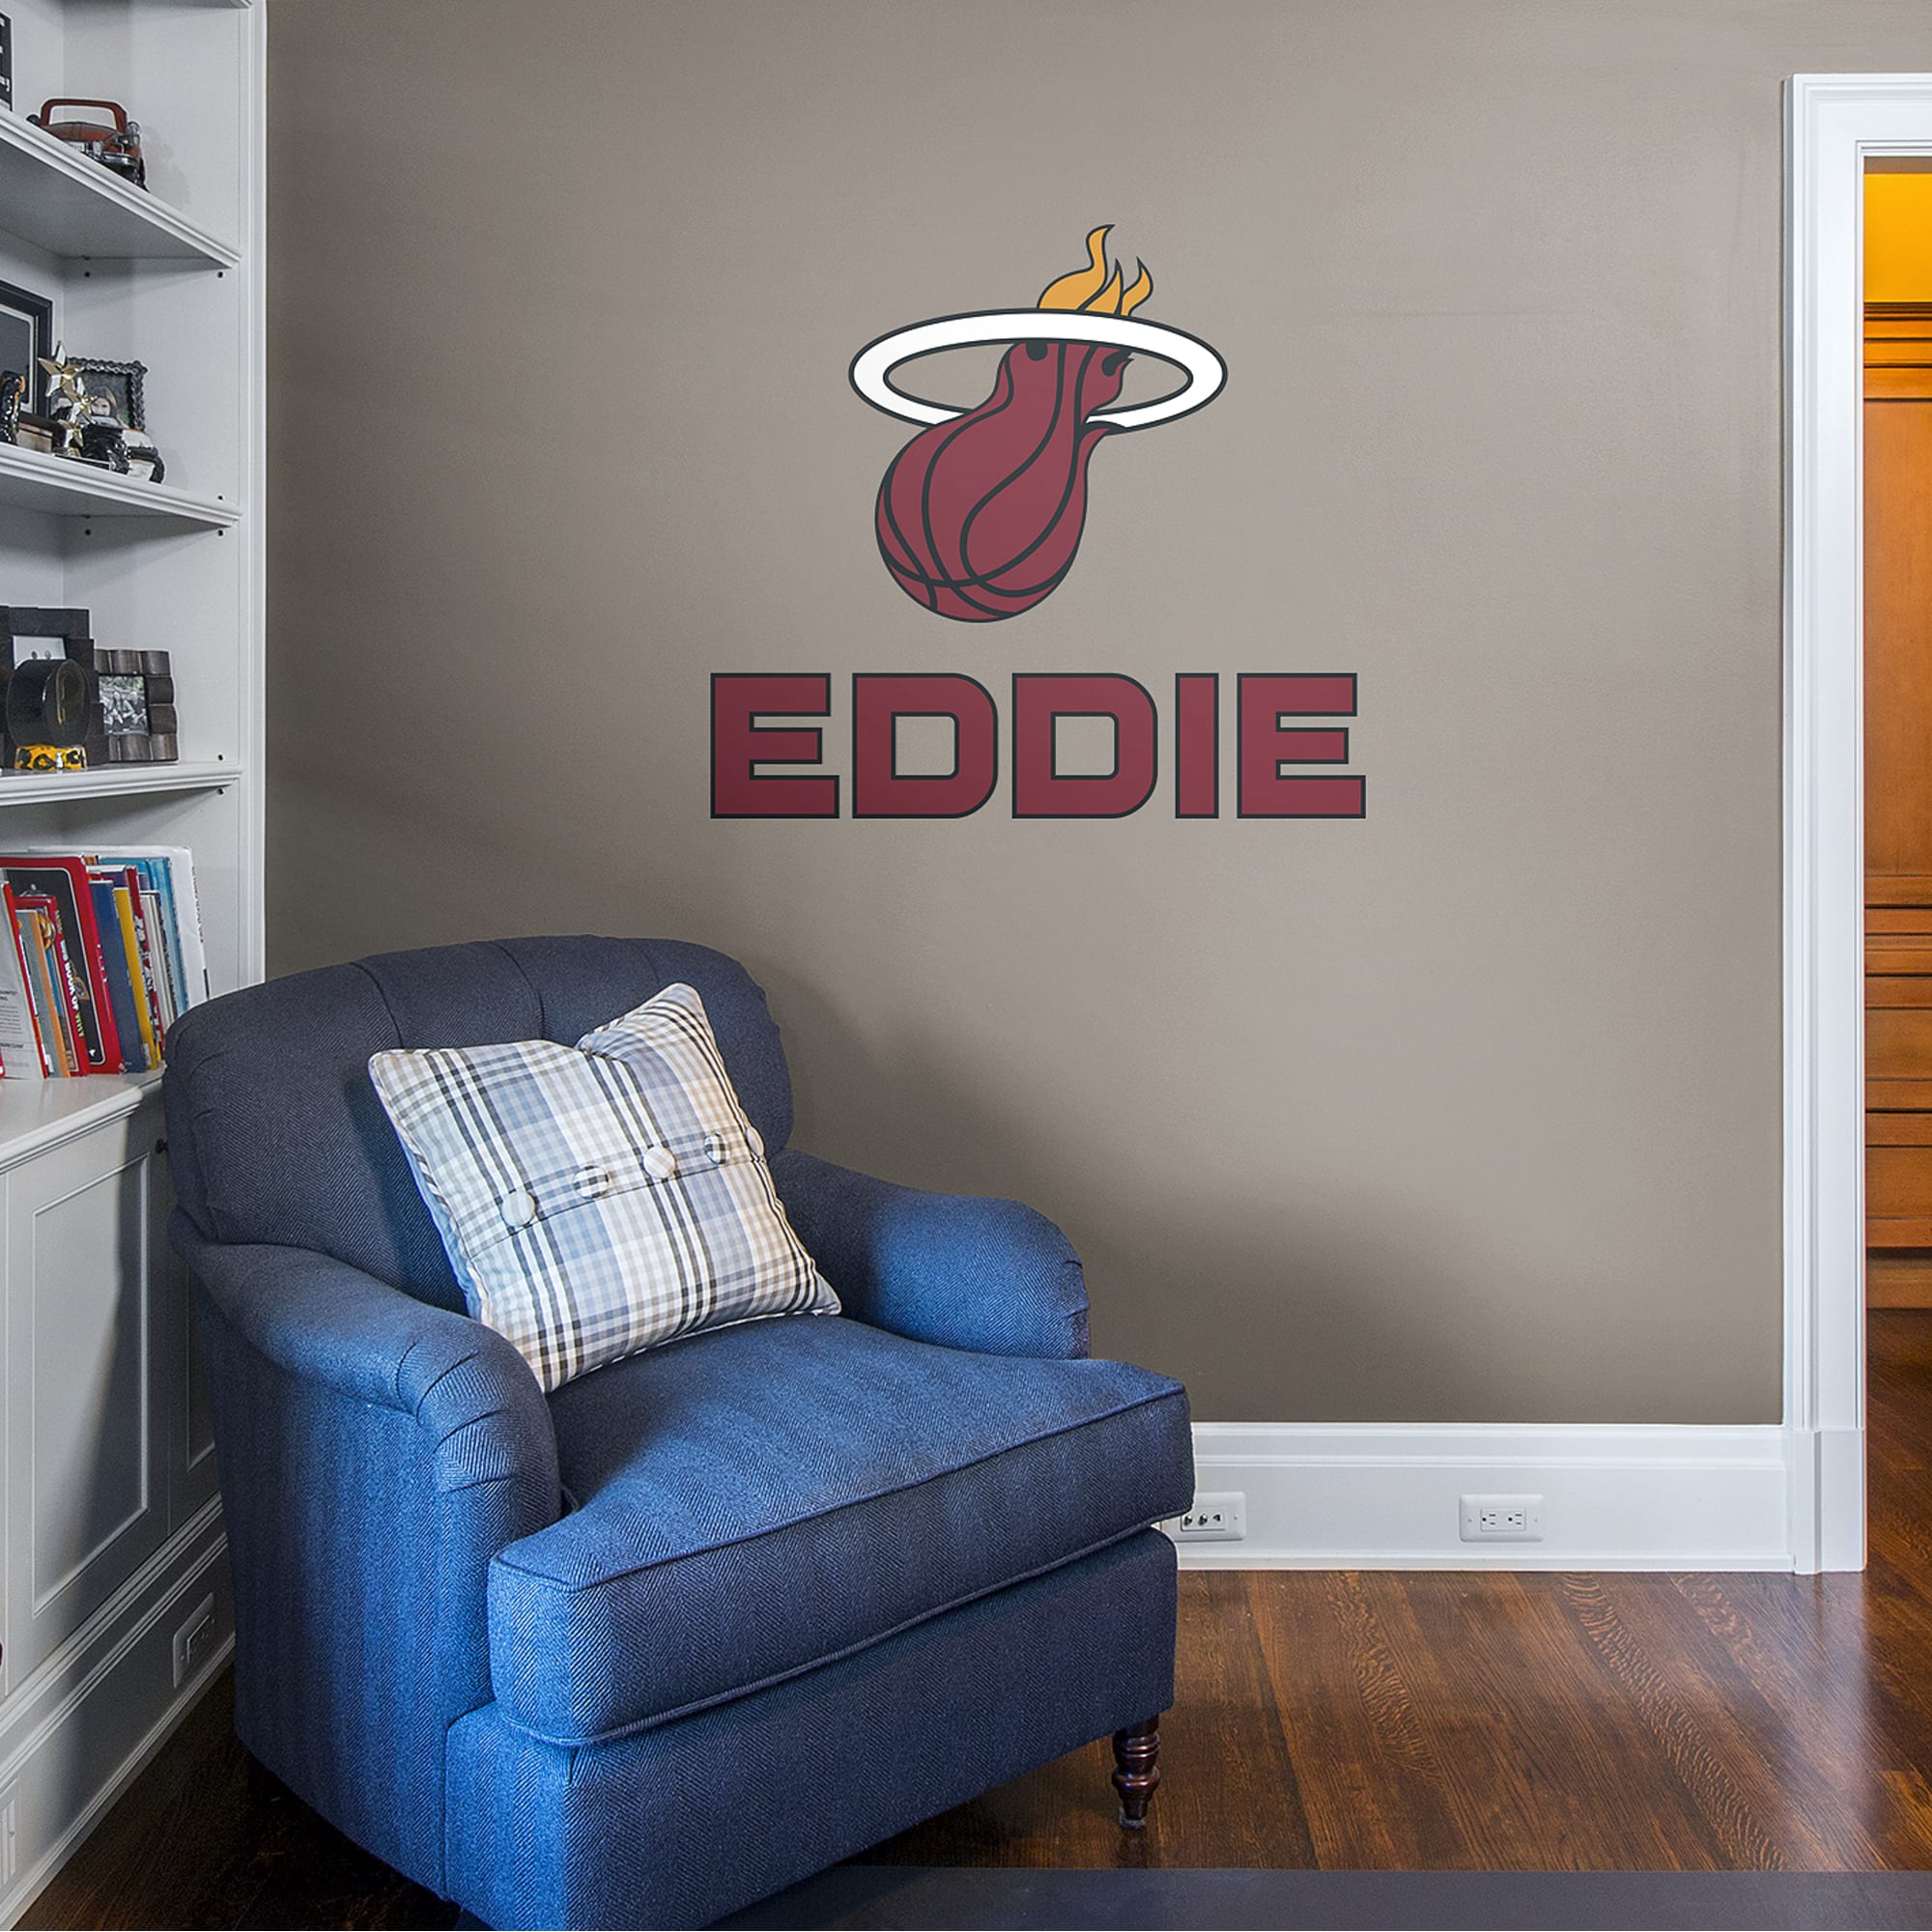 Miami Heat: Stacked Personalized Name - Officially Licensed NBA Transfer Decal in Red (52"W x 39.5"H) by Fathead | Vinyl